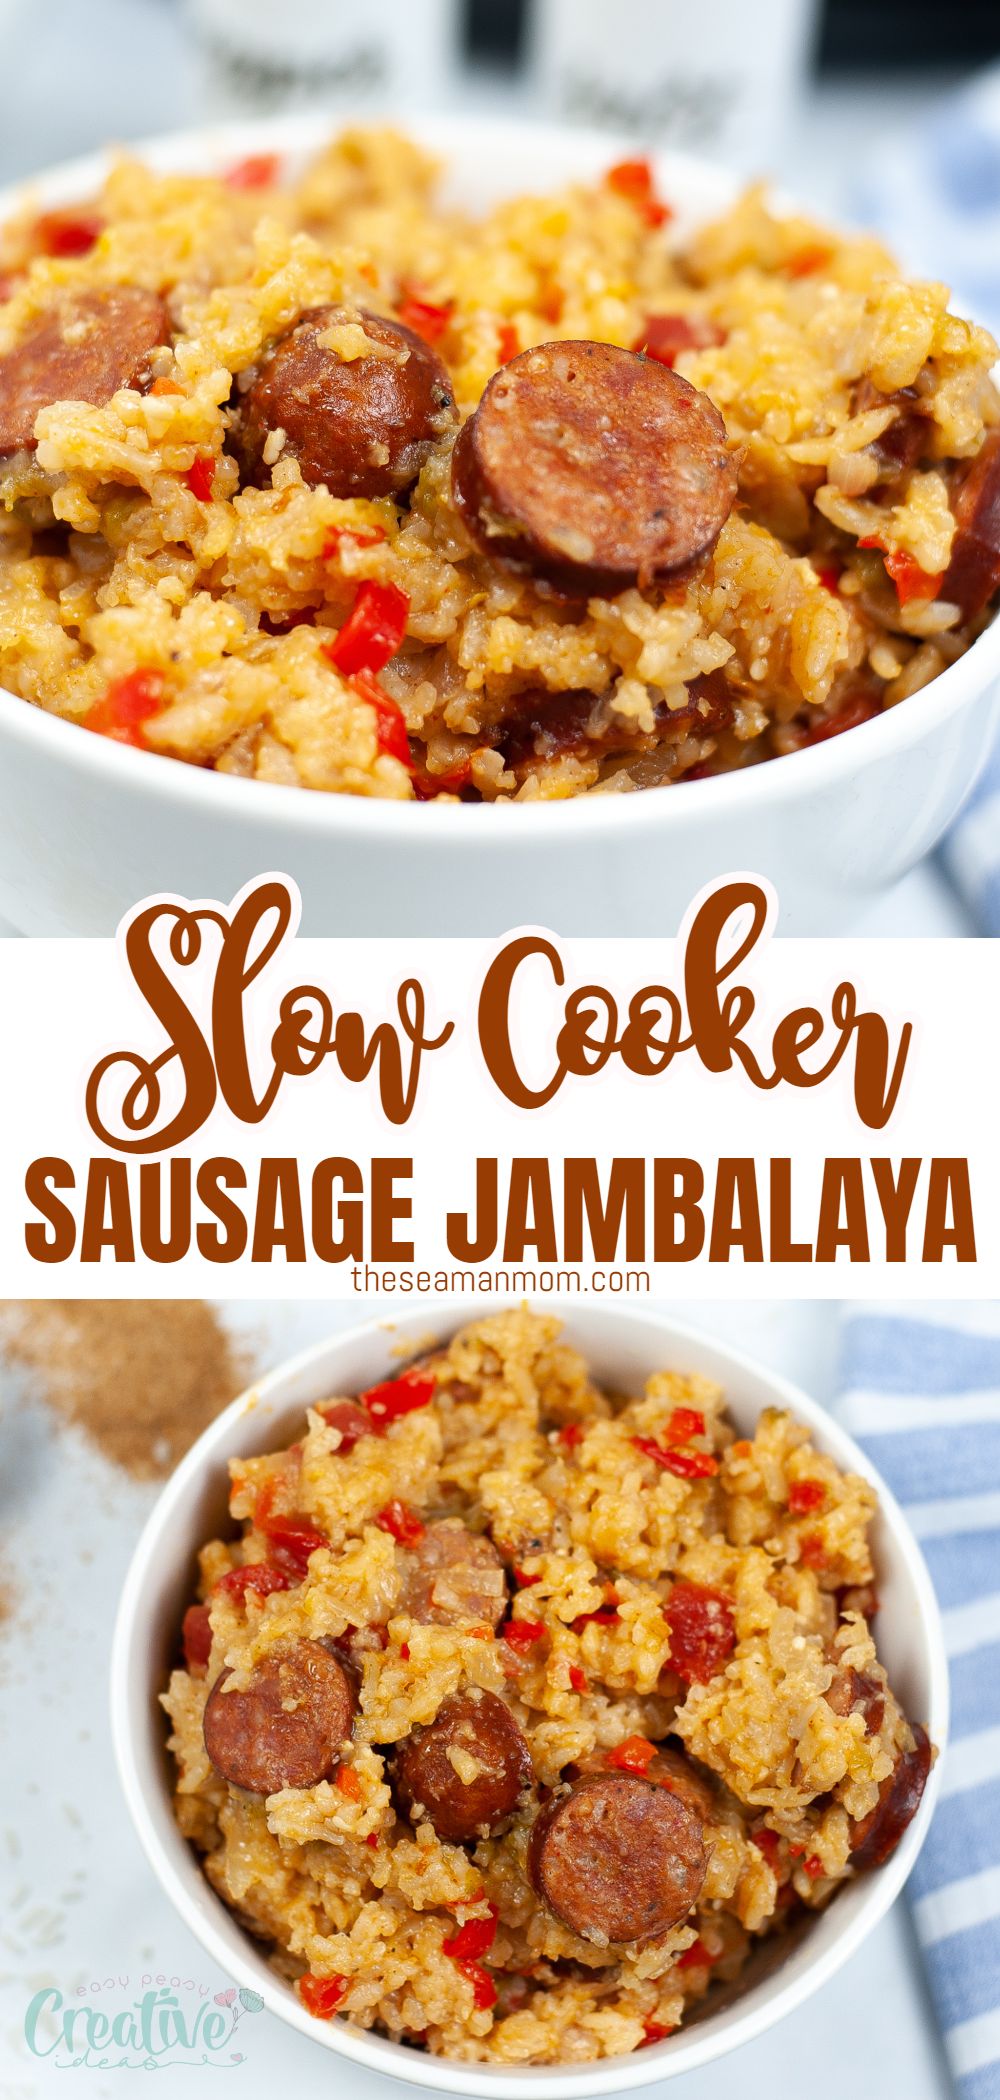 This quick and easy slow cooker jambalaya takes all the hard work out of preparing this classic Cajun dish, ensuring you have an amazing meal on the dinner table tonight with just a few minutes of prep work. via @petroneagu